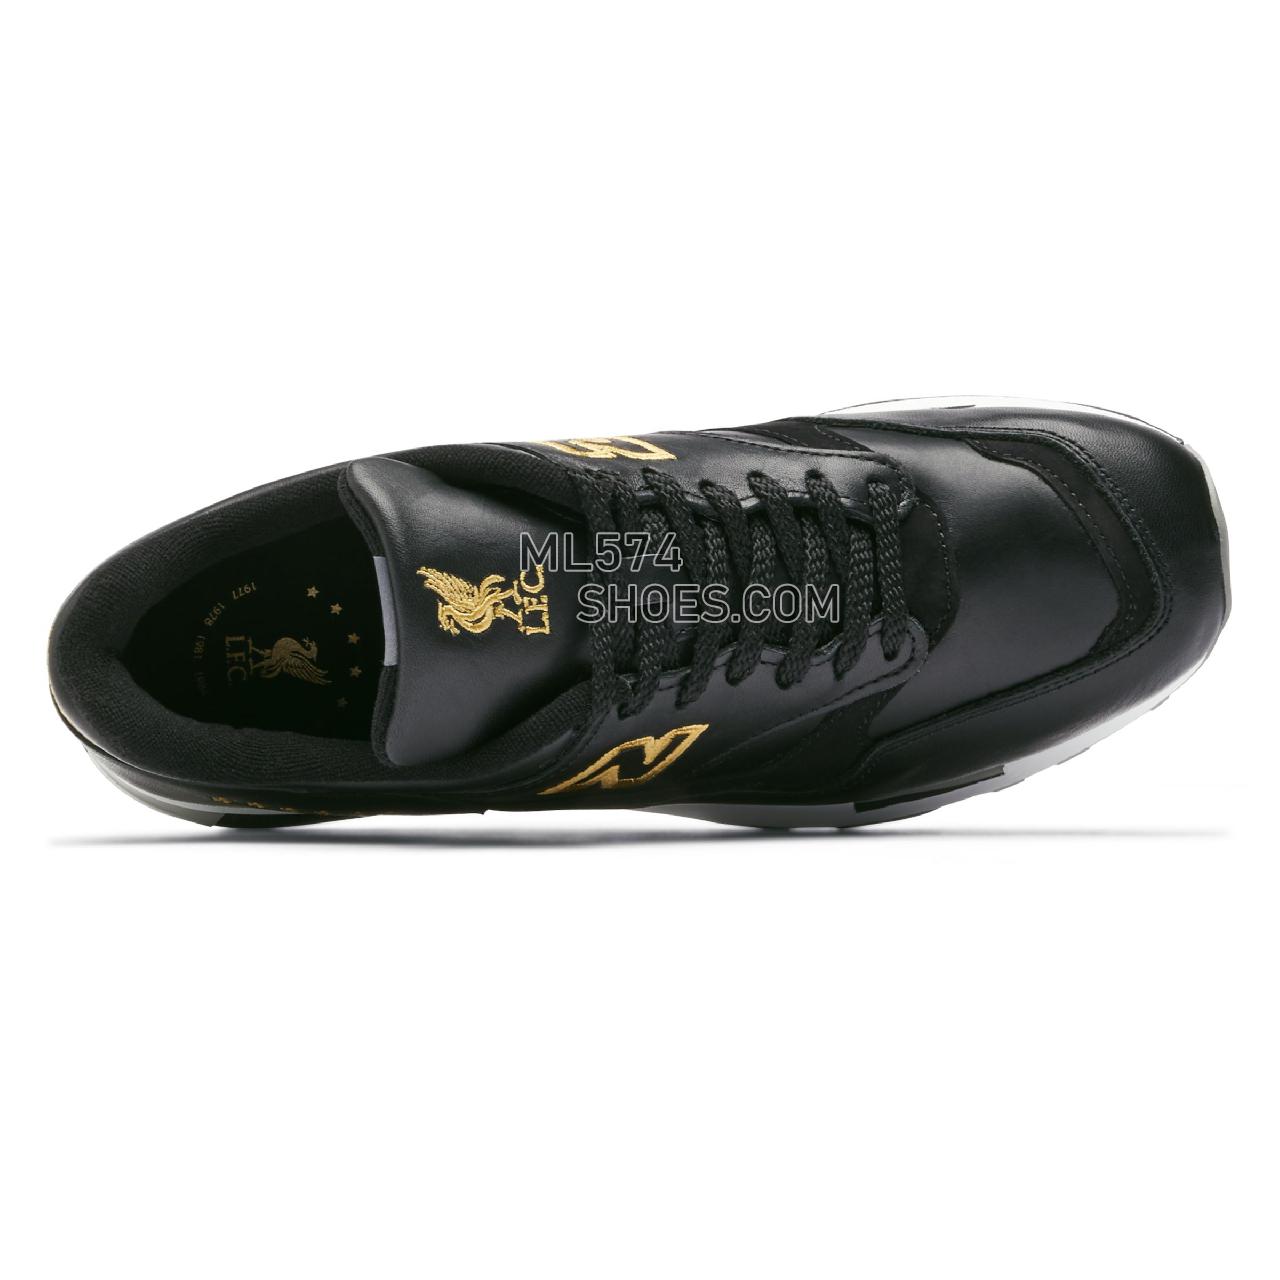 New Balance Made in UK 1500 LFC - Men's Made in USA And UK Sneakers - Black with Gold - M1500LFC